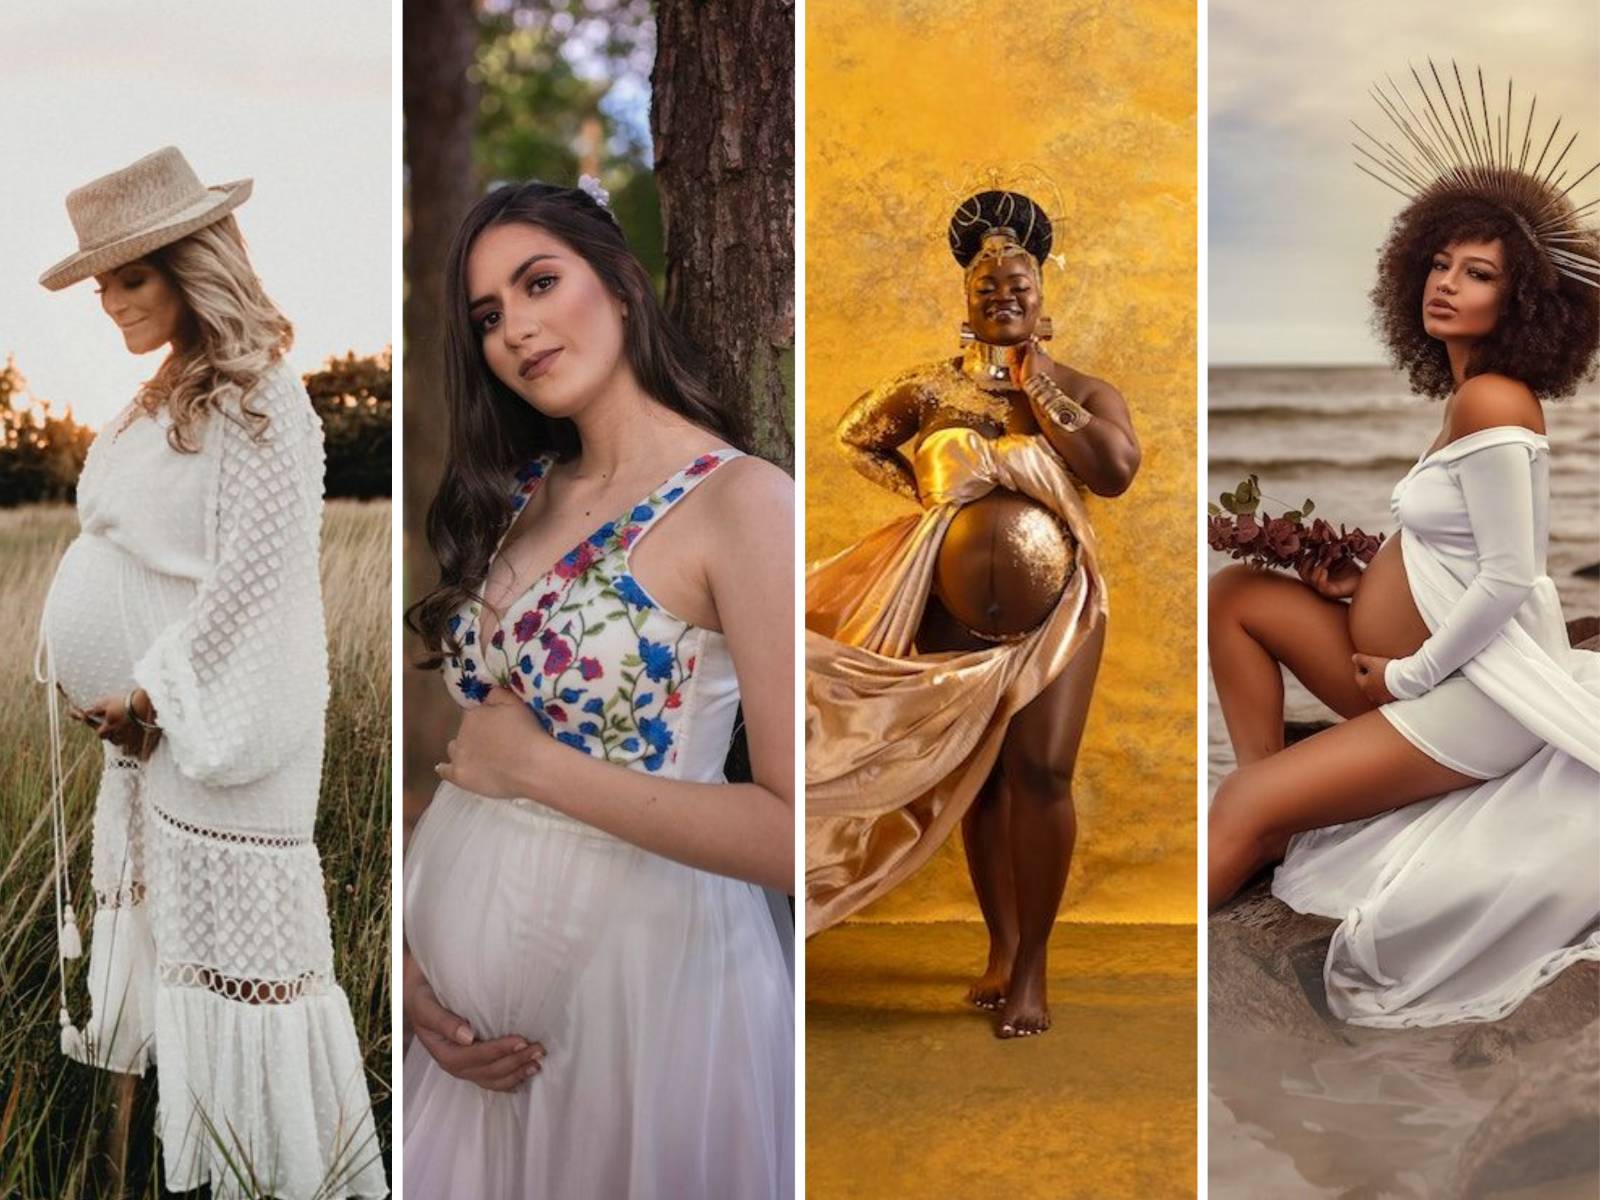 Four pregnant women dressed in different outfits 2